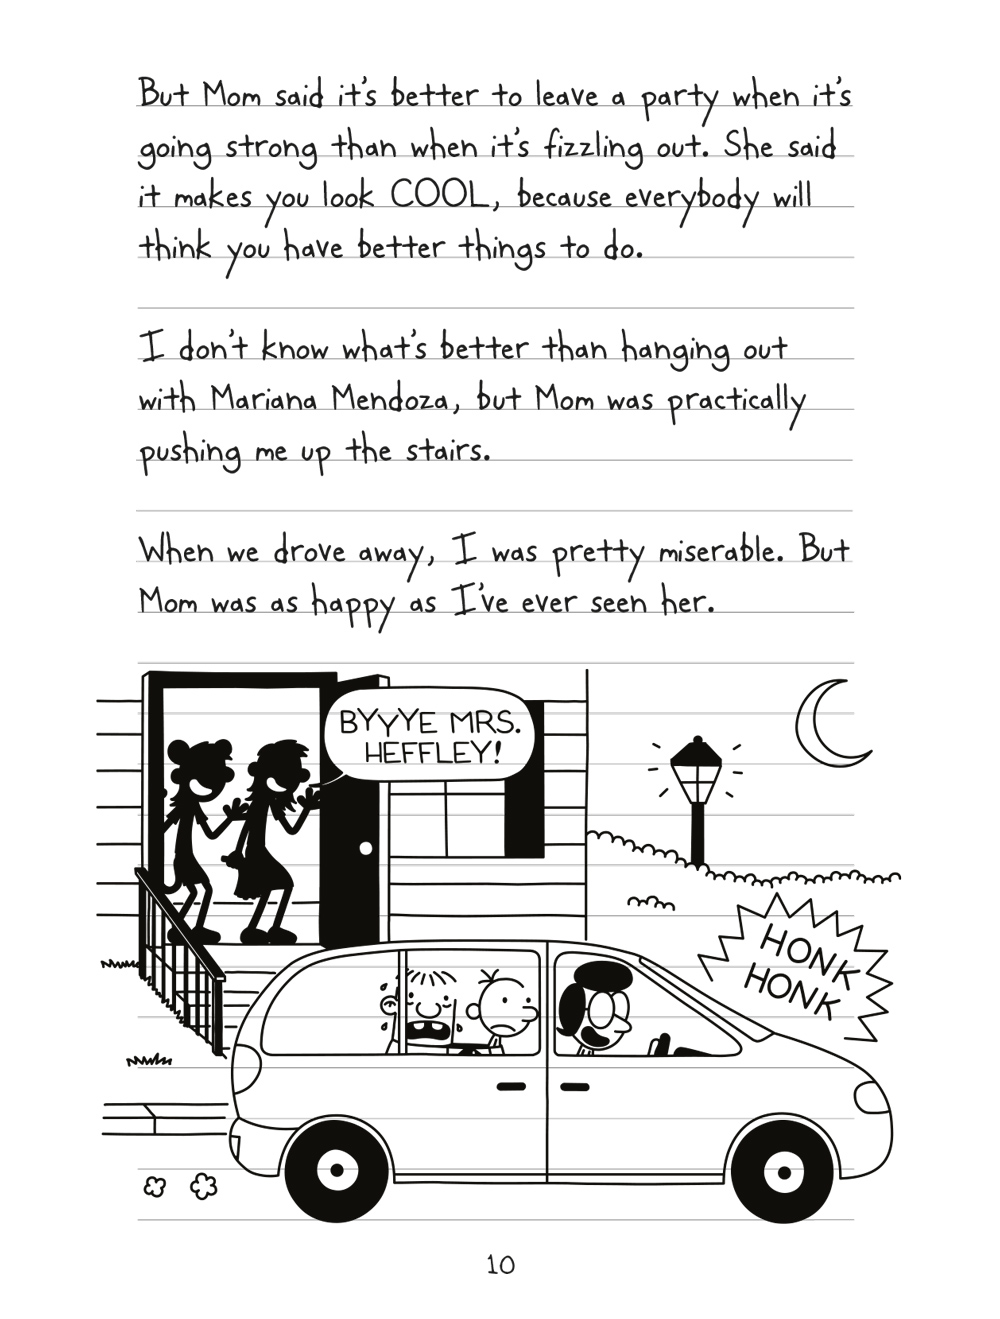 Wimpy Kid Double Down Extract Page 10